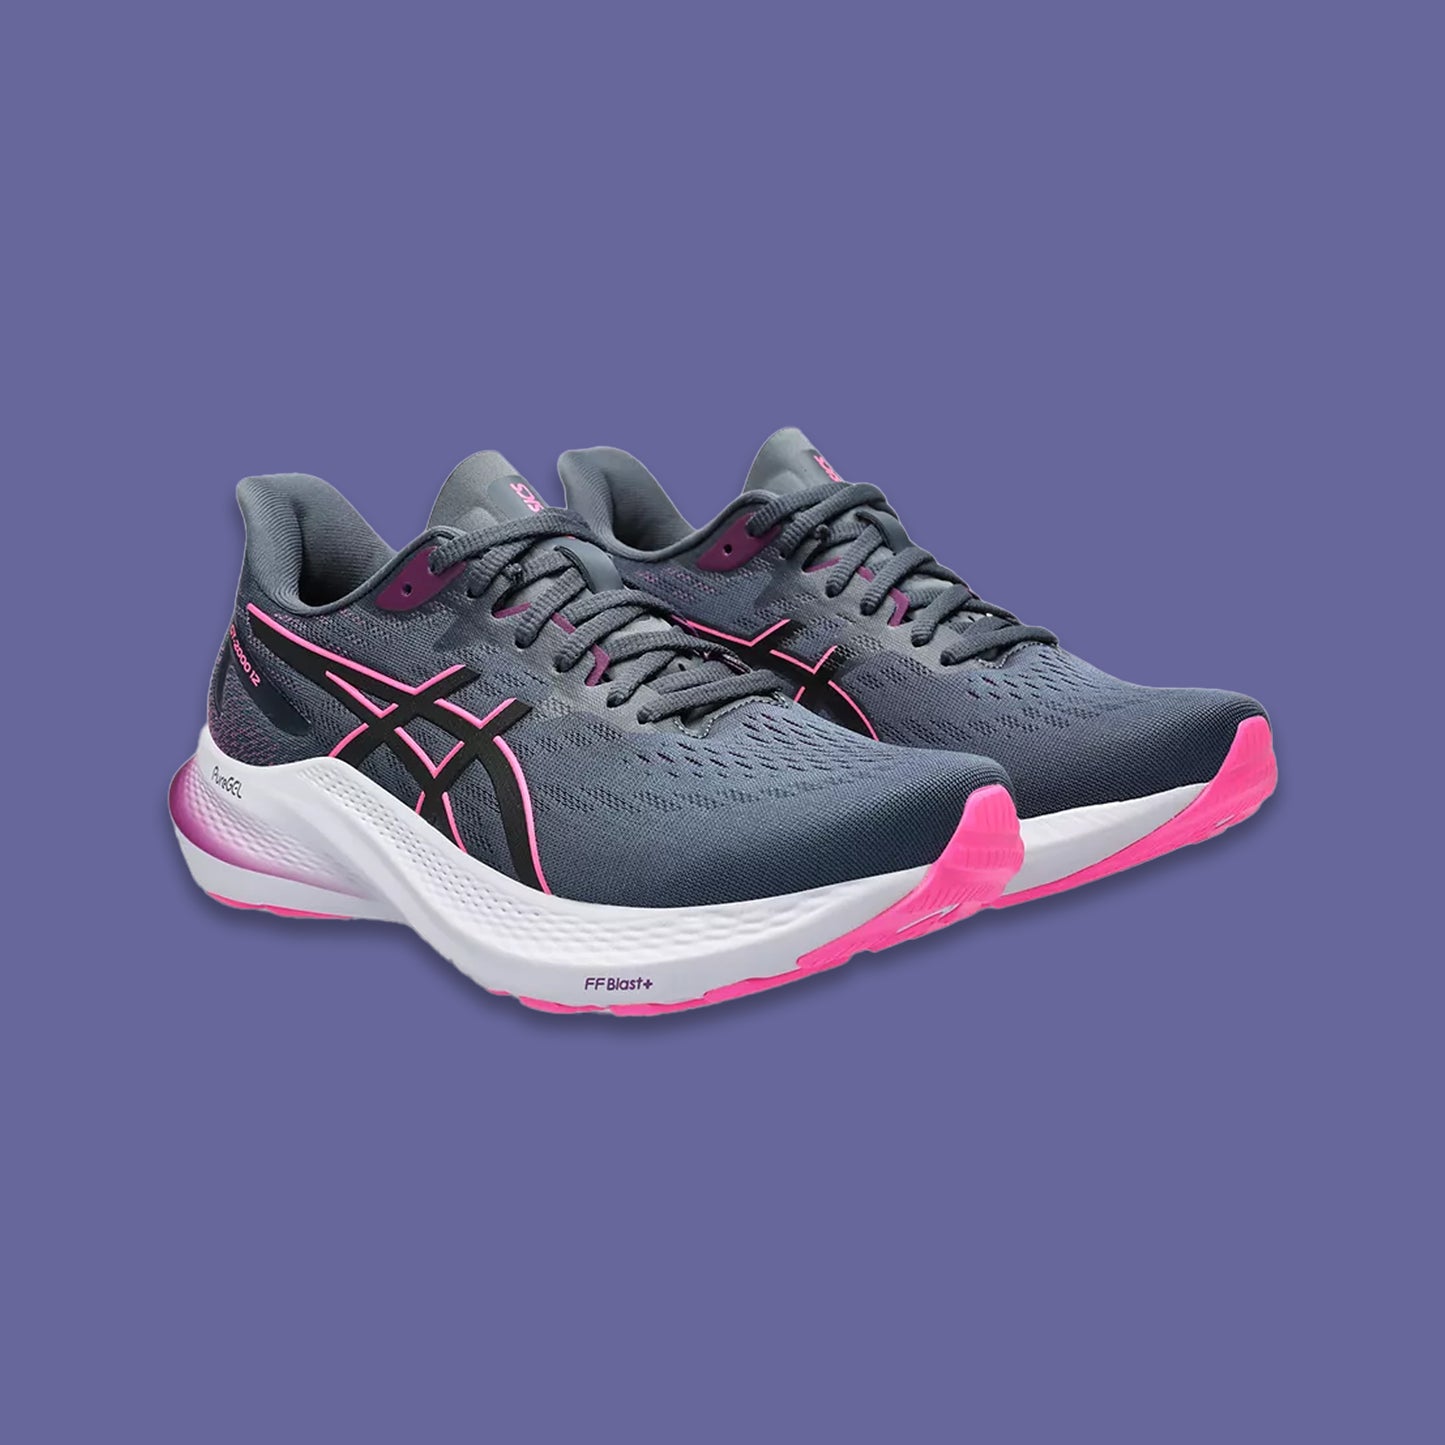 Women's GT-2000 12 - Cushioned Stability Running Shoes